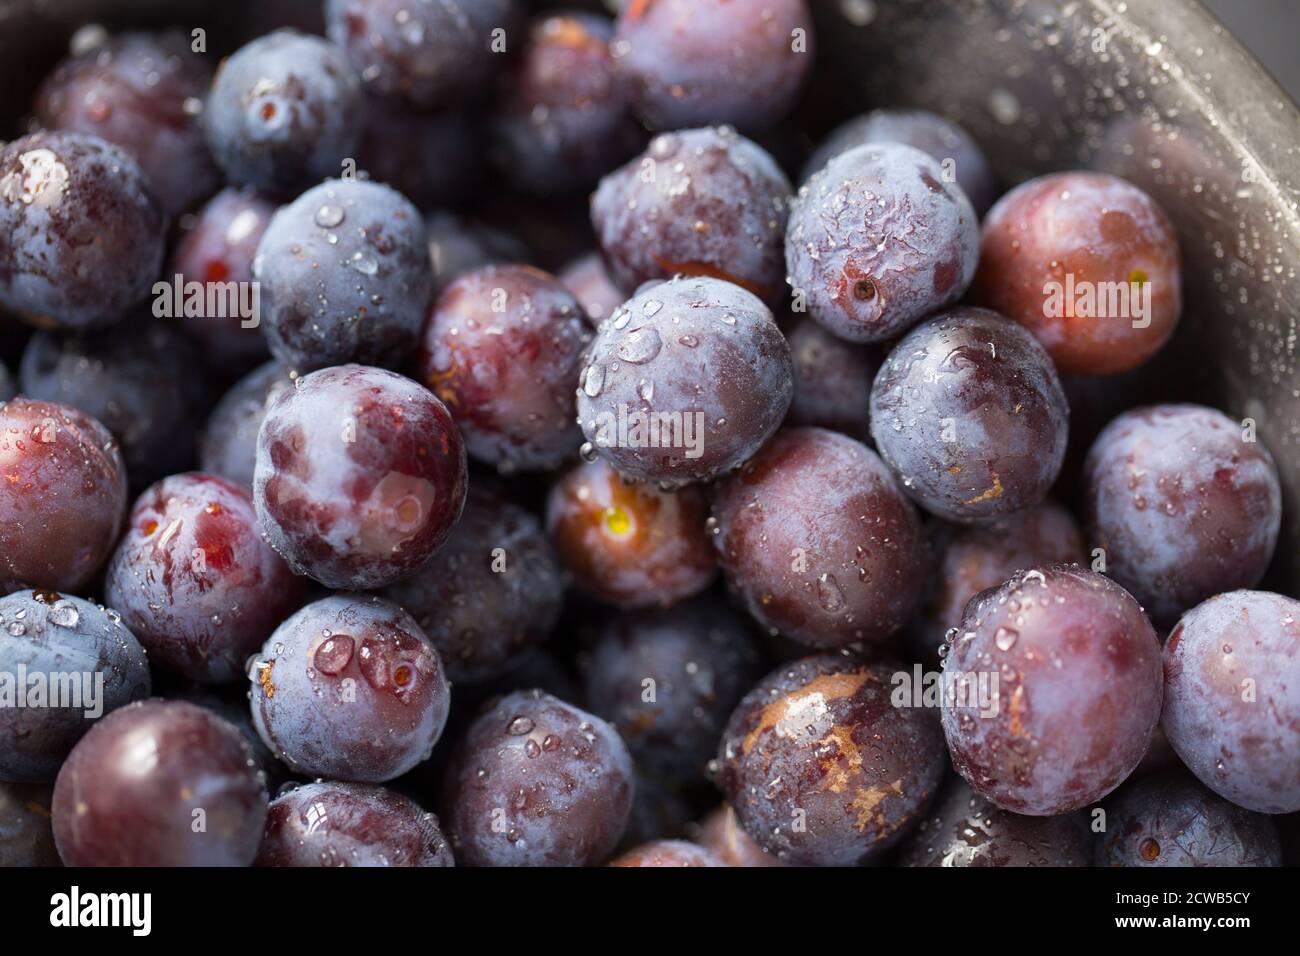 Bullace, a type of plum, that were picked from a tree growing near homes. They have been washed in preparation for making jam. Dorset England UK GB Stock Photo